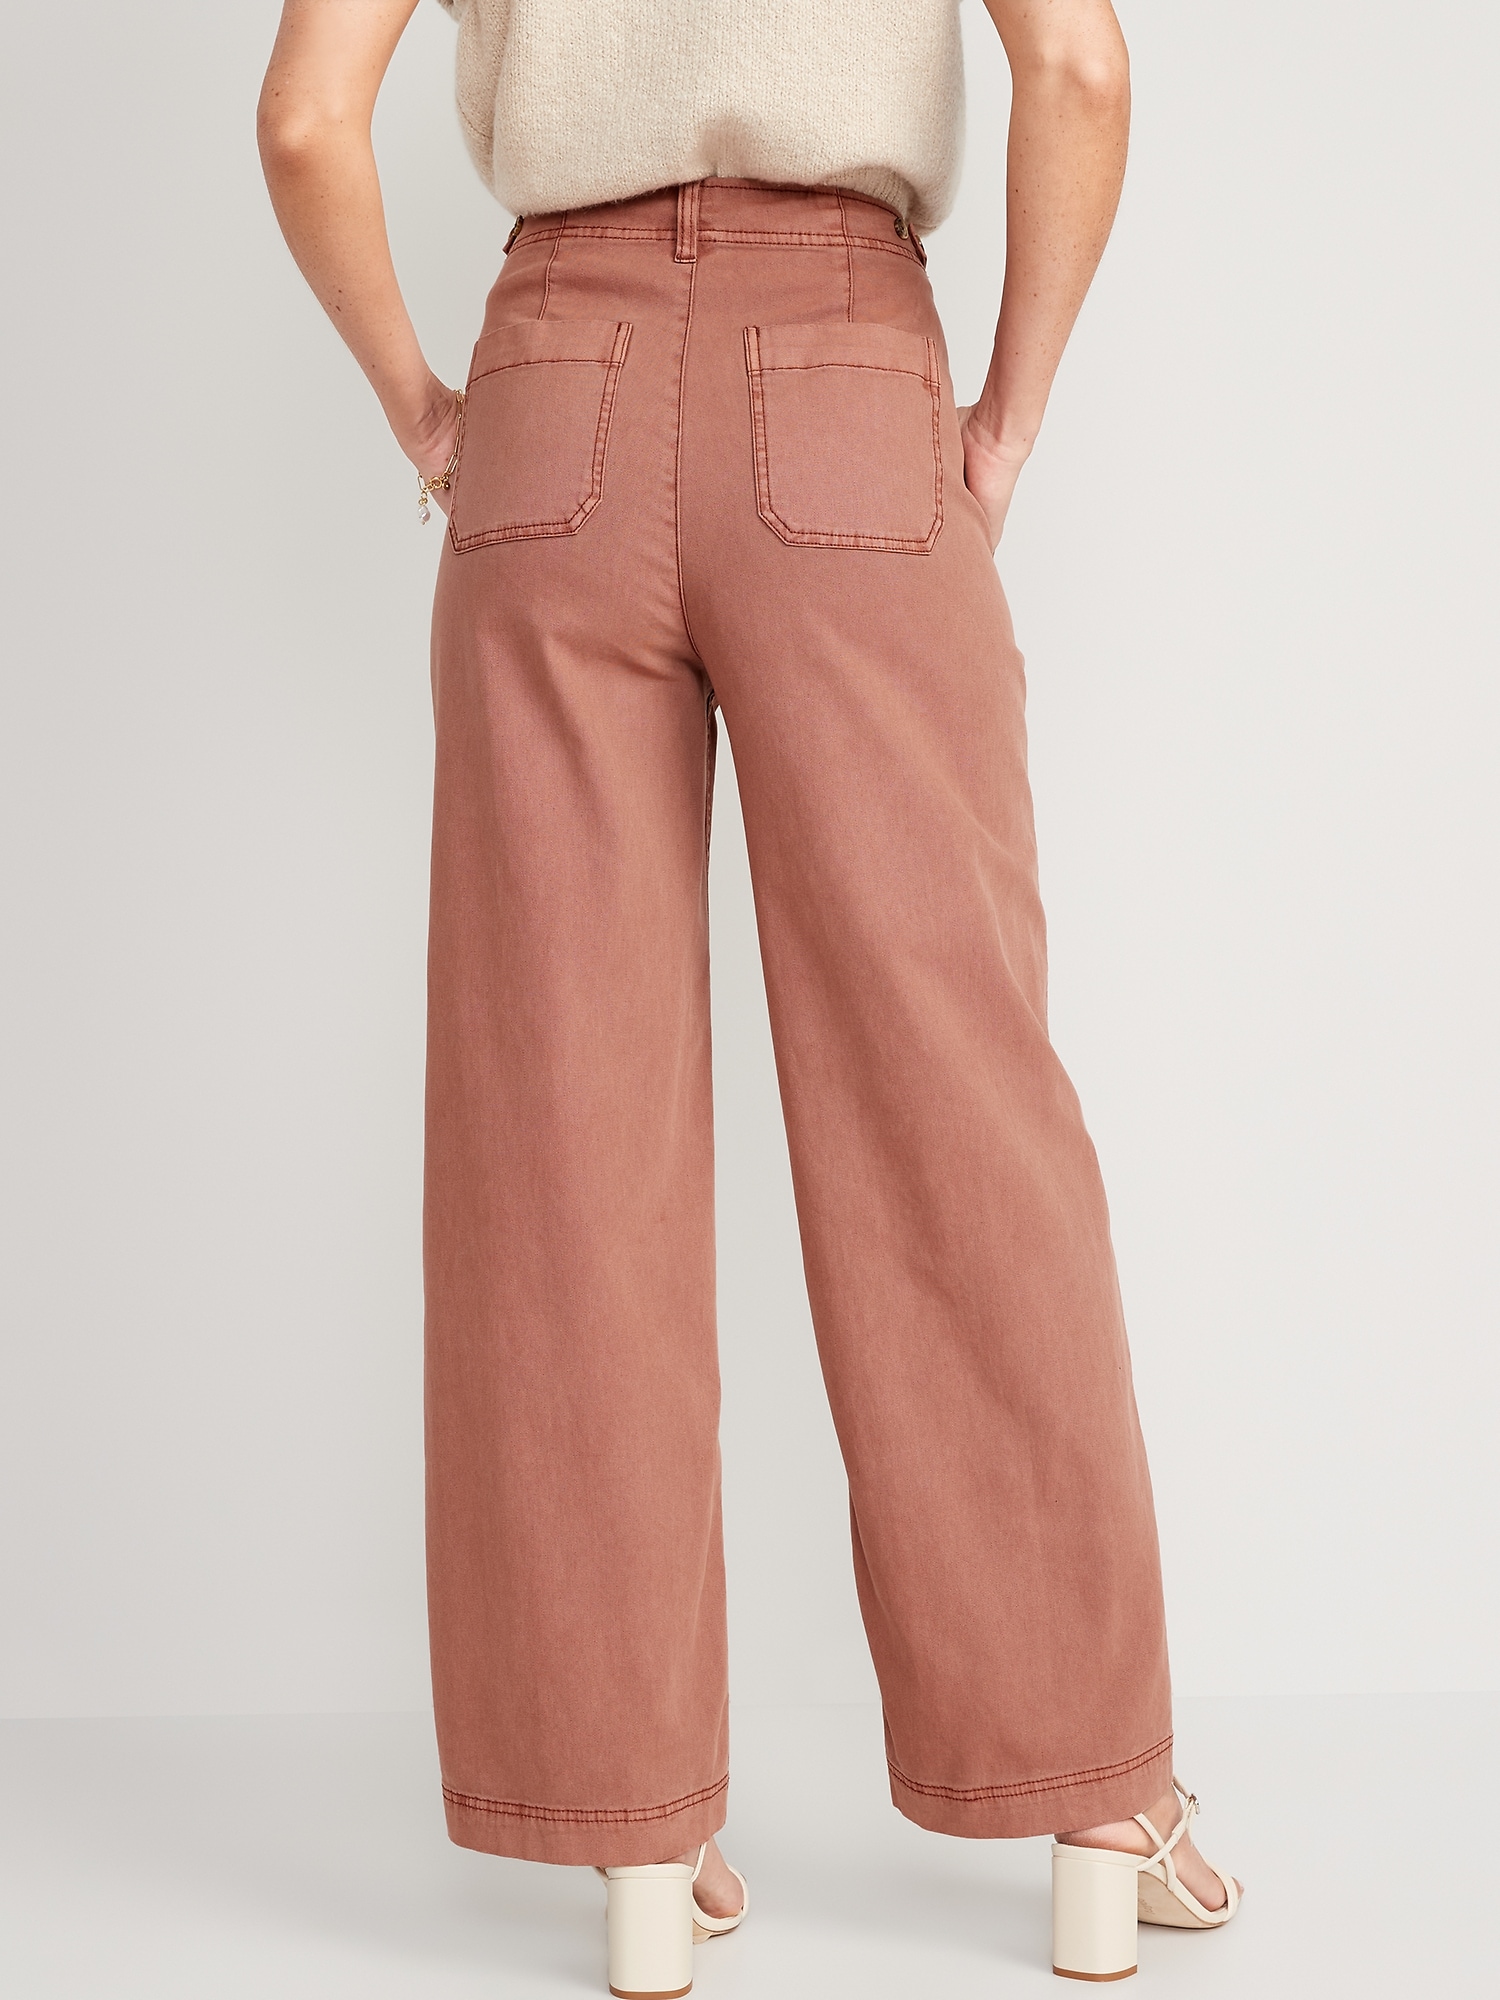 Old Navy, Pants & Jumpsuits, Nwot Womens Tan High Waisted Canvas Wide Leg  Workwear Pants Size 8 Tall